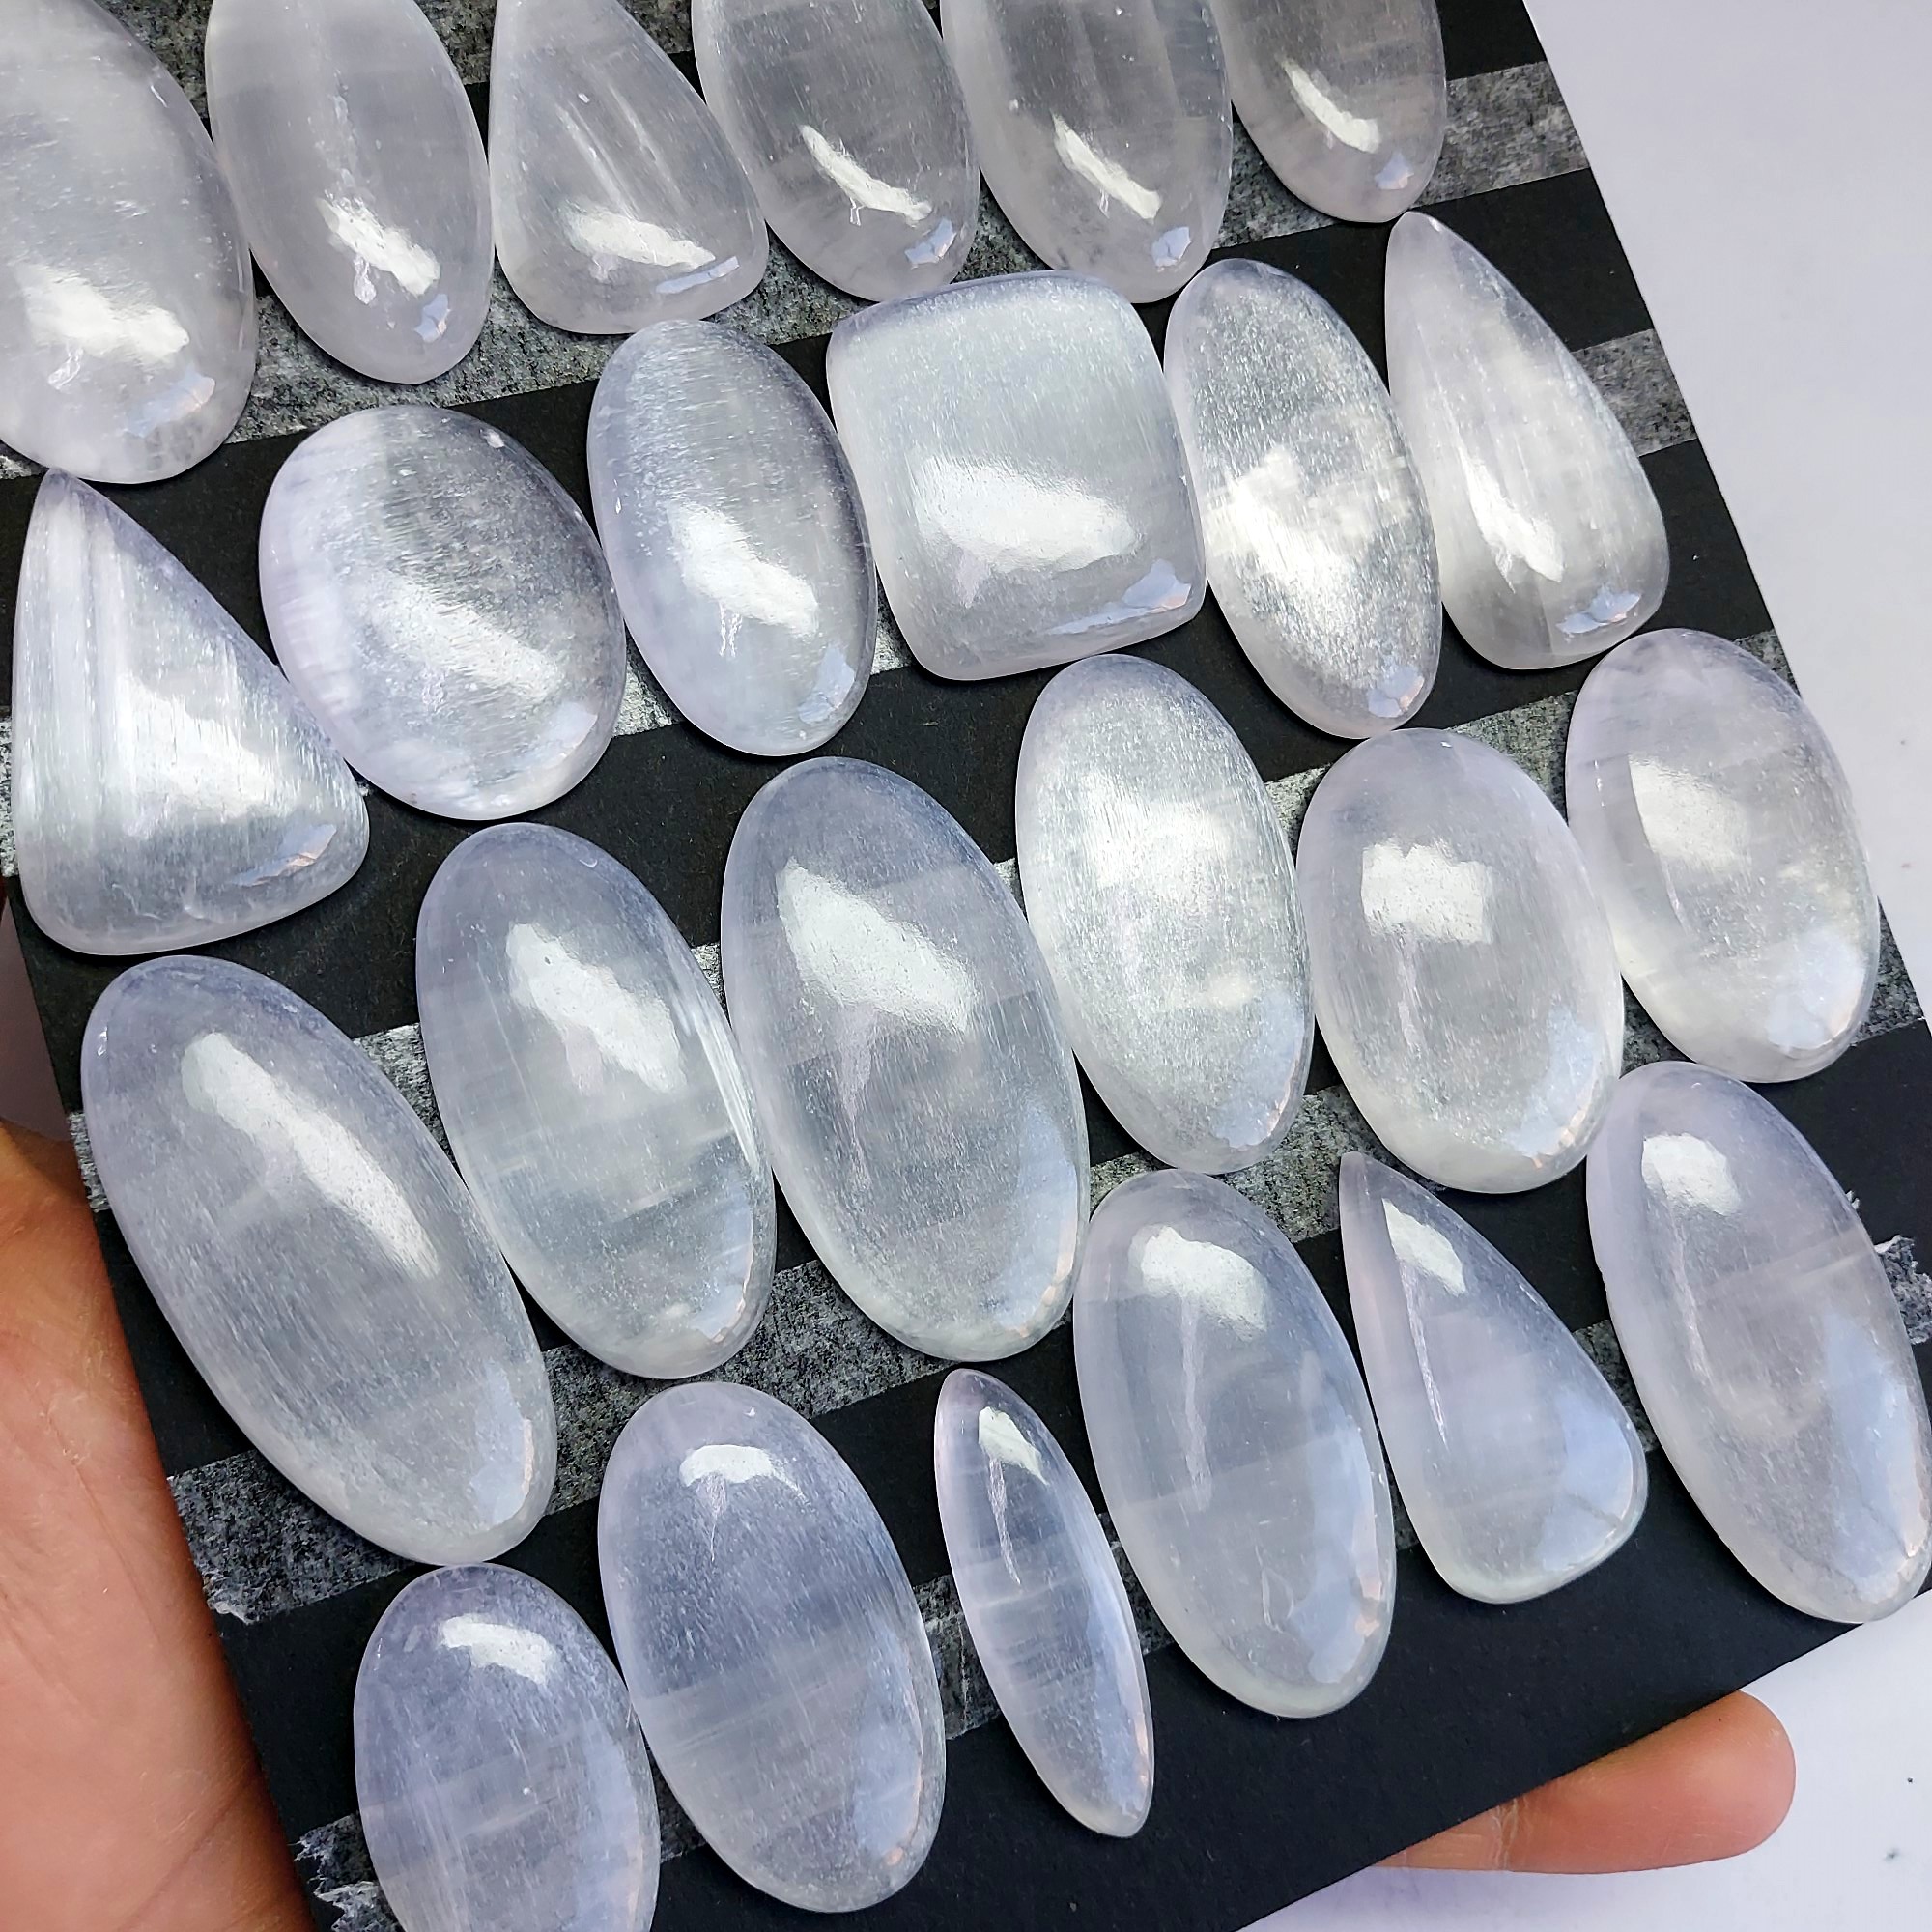 24pcs 1505 Cts Natural White Selenite Loose Cabochon Lot  Gemstone For Jewelry Wholesale Lot Size 52x24 30x20mm